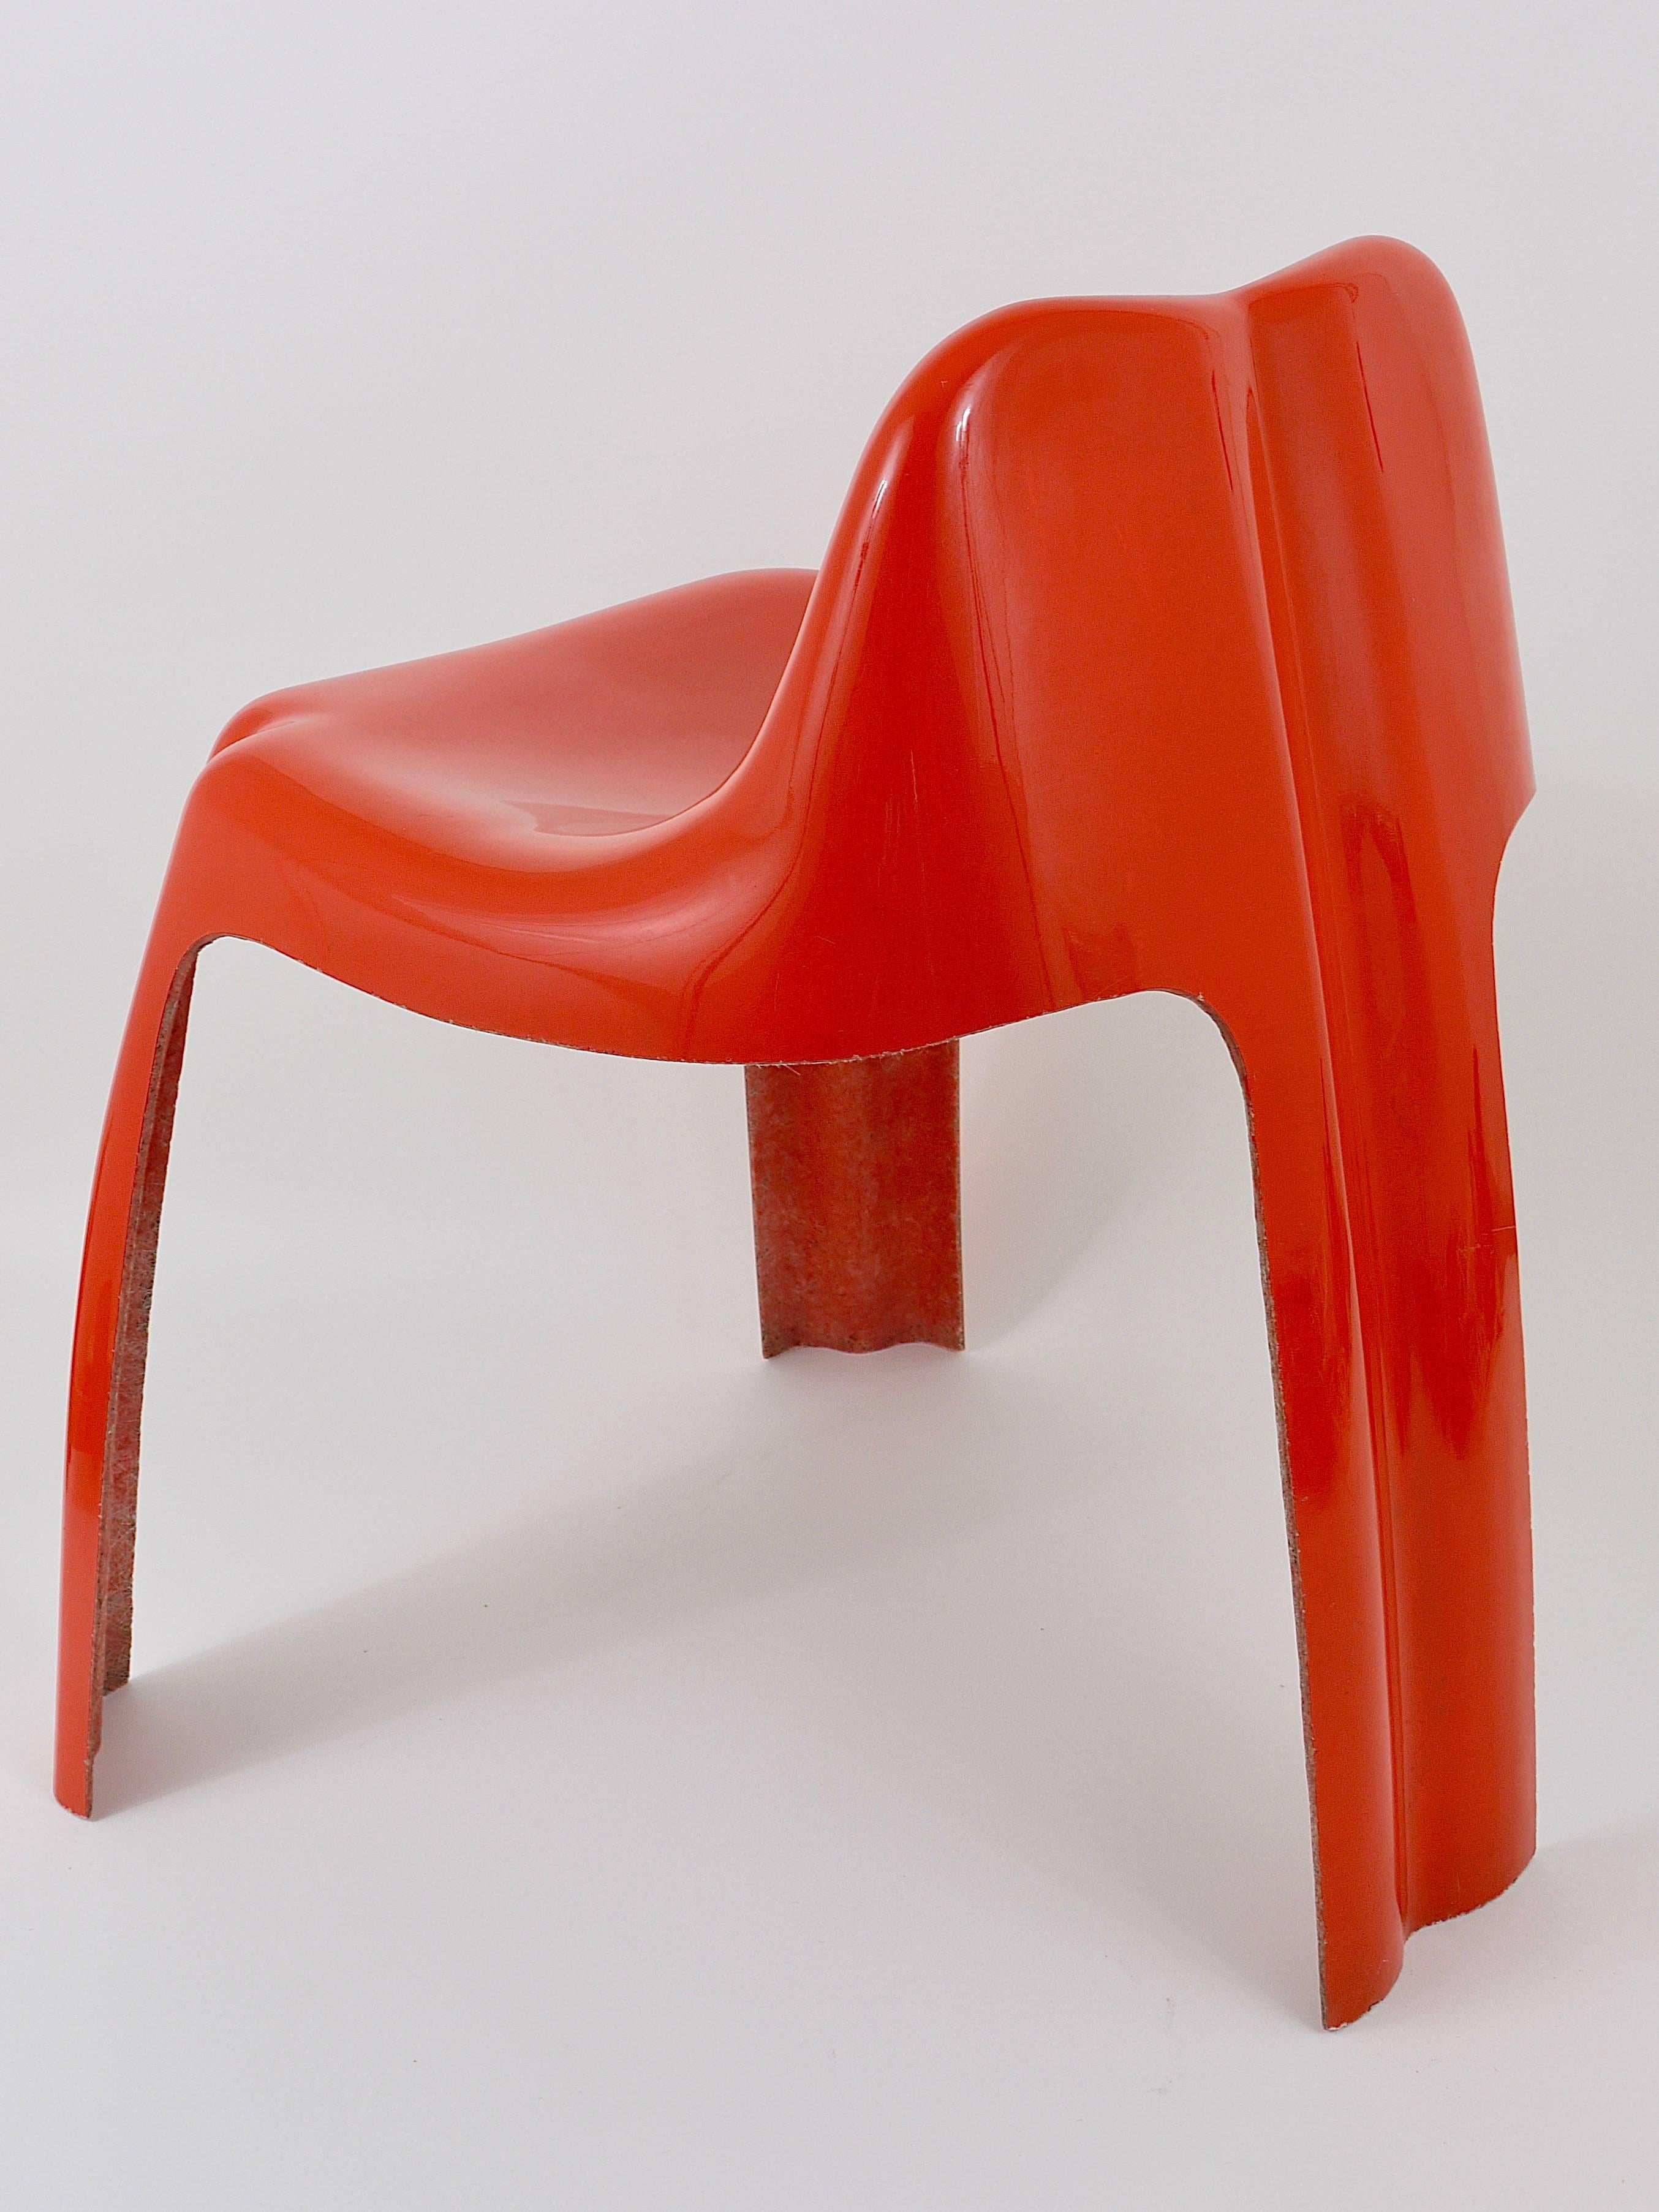 Orange Fiberglass Chair Ginger by Patrick Gingembre, Paulus, France, 1970s For Sale 2